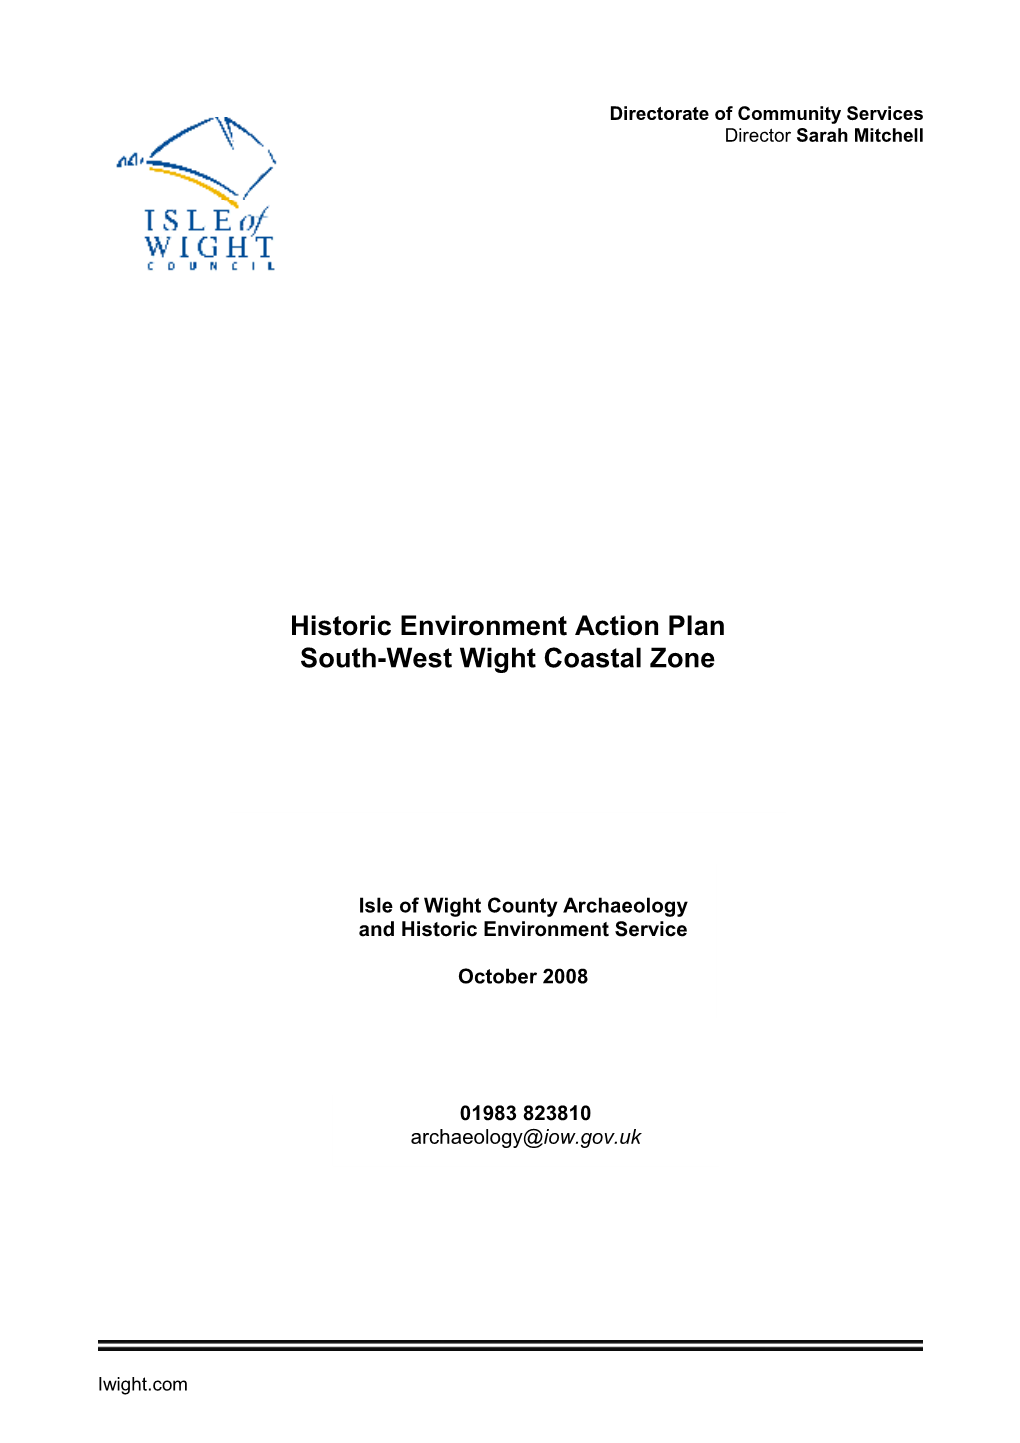 Historic Environment Action Plan South-West Wight Coastal Zone